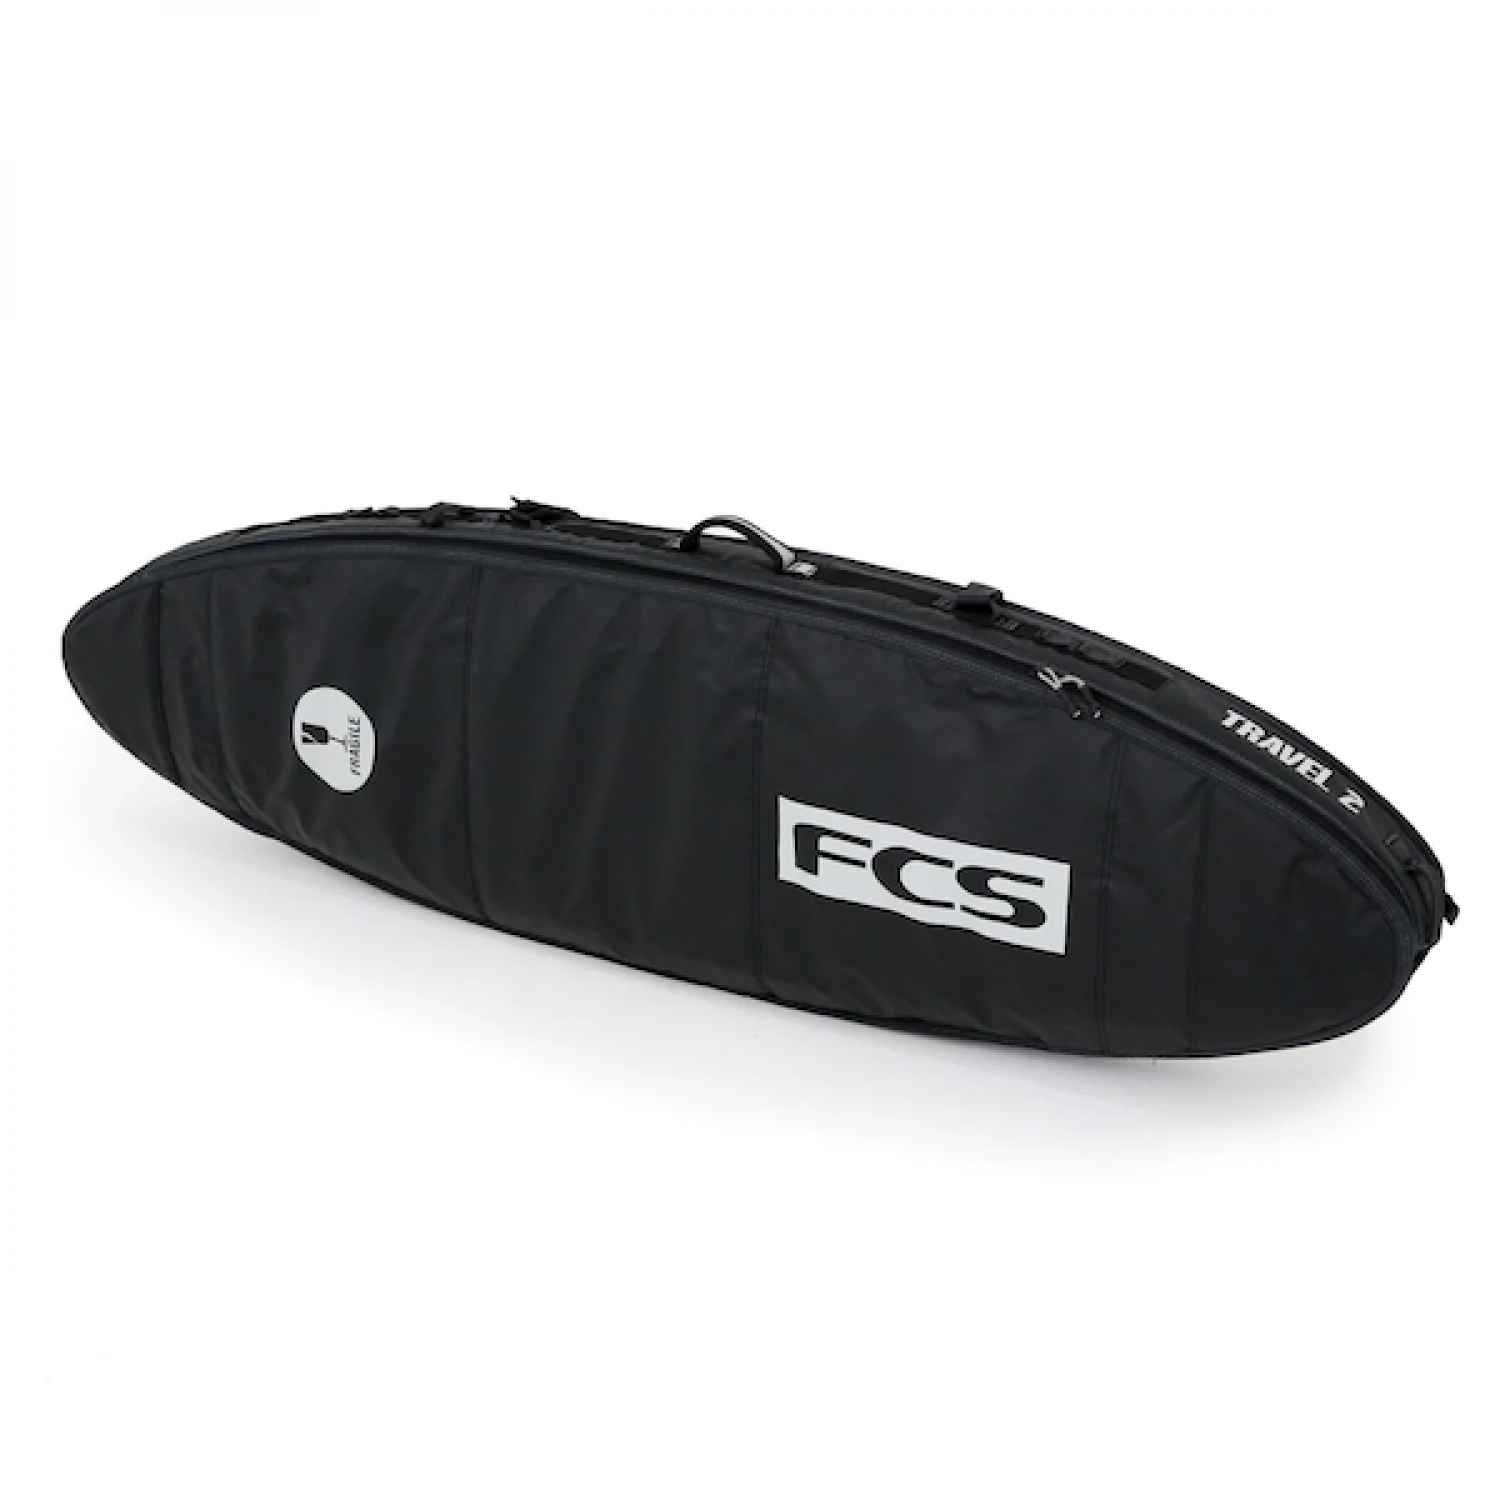 6.0 FCS TRAVEL 2 ALL PURPOSE SURFBOARD COVER